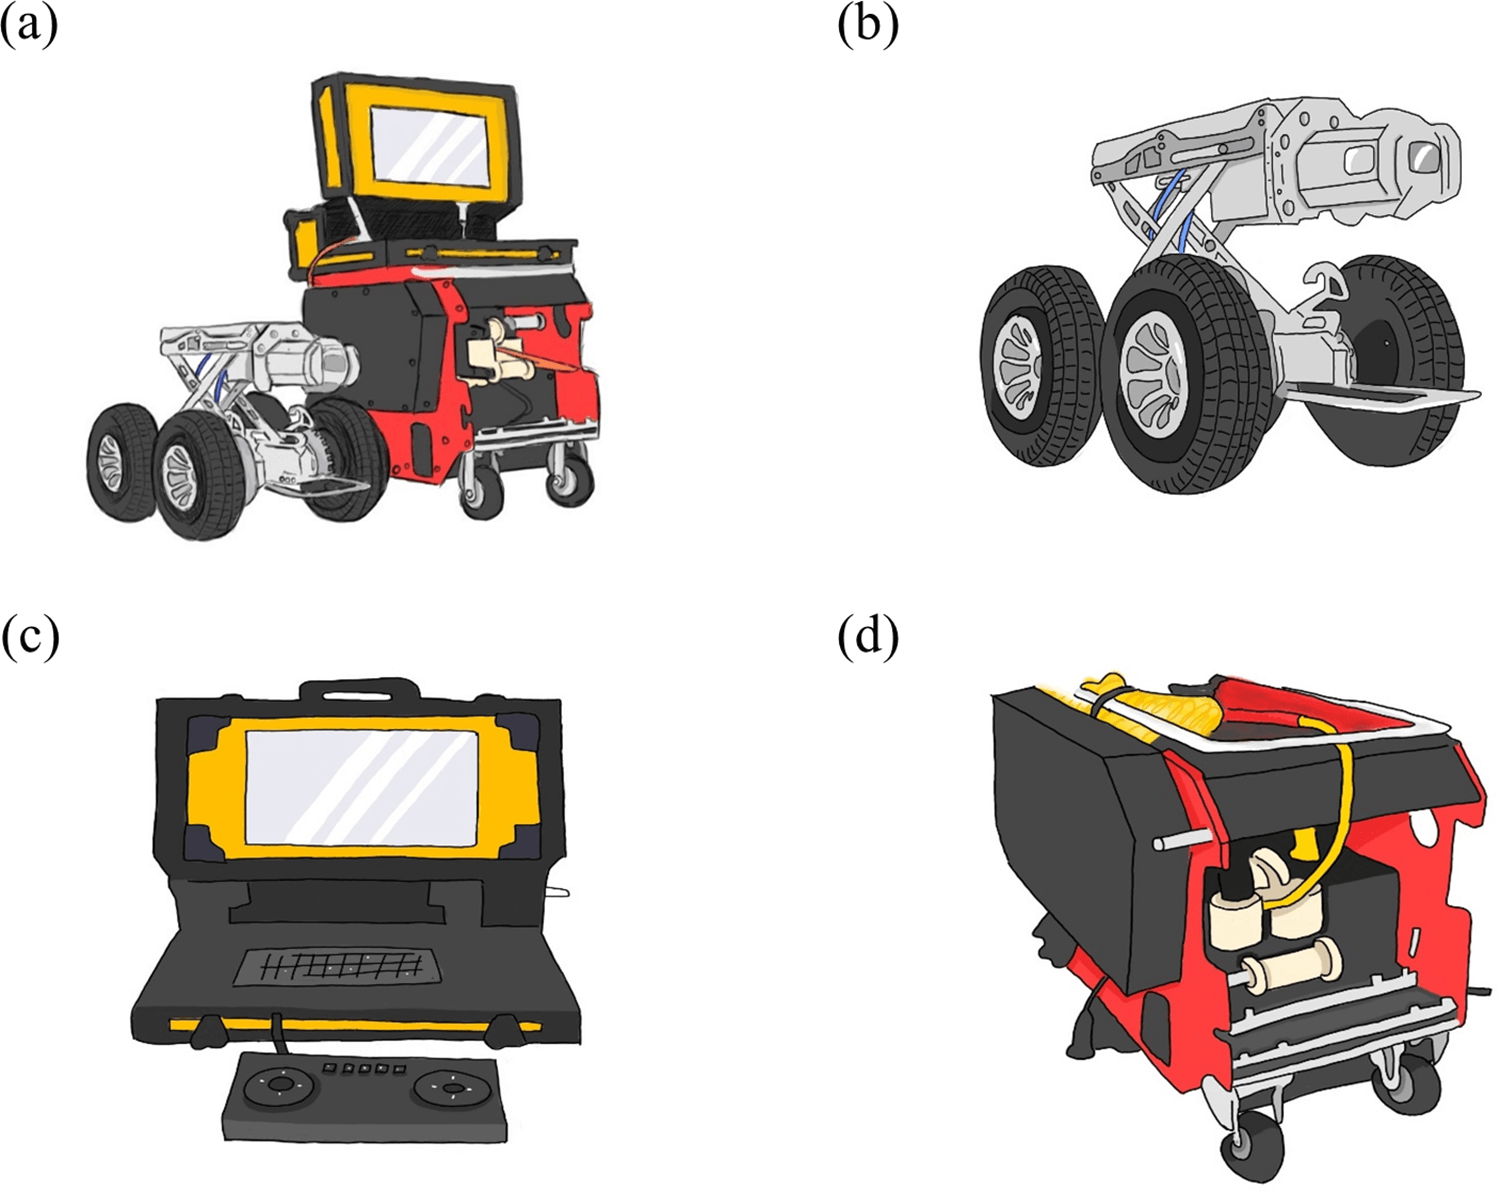 Components of the UGV mosquito-fighting robot